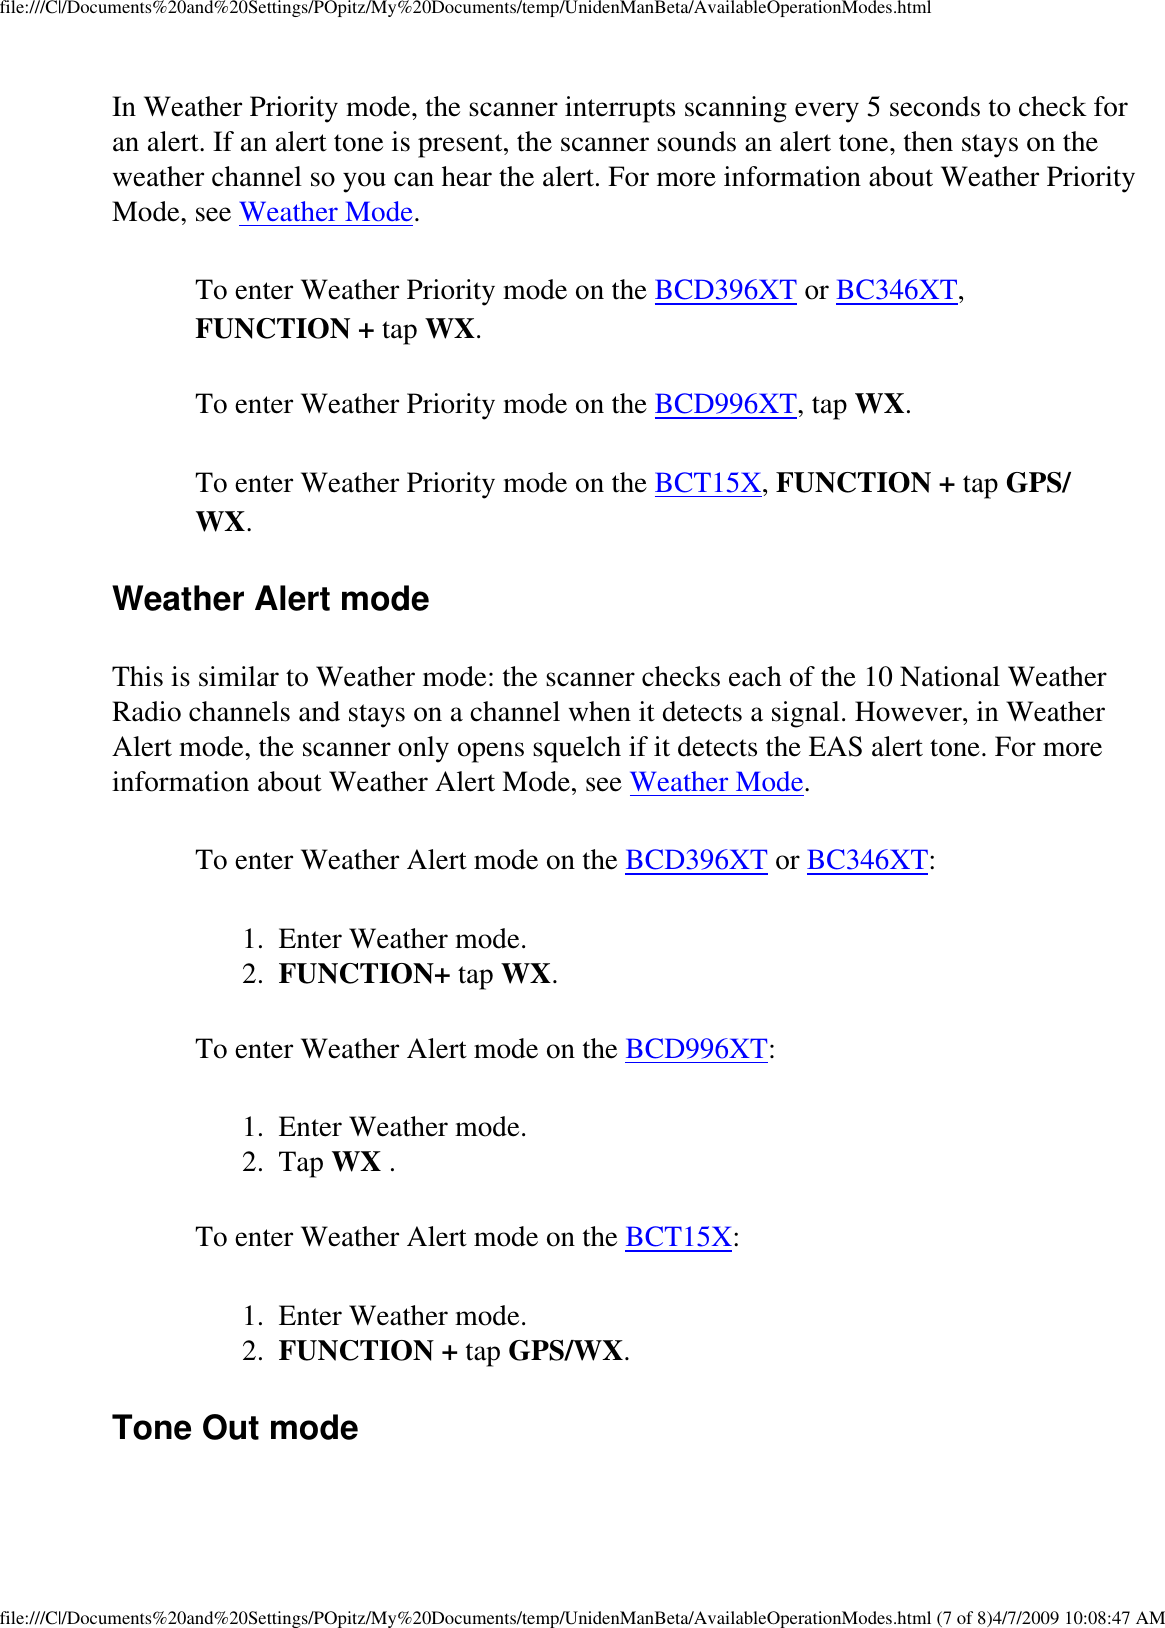 file:///C|/Documents%20and%20Settings/POpitz/My%20Documents/temp/UnidenManBeta/AvailableOperationModes.htmlIn Weather Priority mode, the scanner interrupts scanning every 5 seconds to check for an alert. If an alert tone is present, the scanner sounds an alert tone, then stays on the weather channel so you can hear the alert. For more information about Weather Priority Mode, see Weather Mode. To enter Weather Priority mode on the BCD396XT or BC346XT, FUNCTION + tap WX. To enter Weather Priority mode on the BCD996XT, tap WX. To enter Weather Priority mode on the BCT15X, FUNCTION + tap GPS/WX. Weather Alert mode This is similar to Weather mode: the scanner checks each of the 10 National Weather Radio channels and stays on a channel when it detects a signal. However, in Weather Alert mode, the scanner only opens squelch if it detects the EAS alert tone. For more information about Weather Alert Mode, see Weather Mode. To enter Weather Alert mode on the BCD396XT or BC346XT: 1.  Enter Weather mode. 2.  FUNCTION+ tap WX. To enter Weather Alert mode on the BCD996XT: 1.  Enter Weather mode. 2.  Tap WX . To enter Weather Alert mode on the BCT15X: 1.  Enter Weather mode. 2.  FUNCTION + tap GPS/WX. Tone Out mode file:///C|/Documents%20and%20Settings/POpitz/My%20Documents/temp/UnidenManBeta/AvailableOperationModes.html (7 of 8)4/7/2009 10:08:47 AM